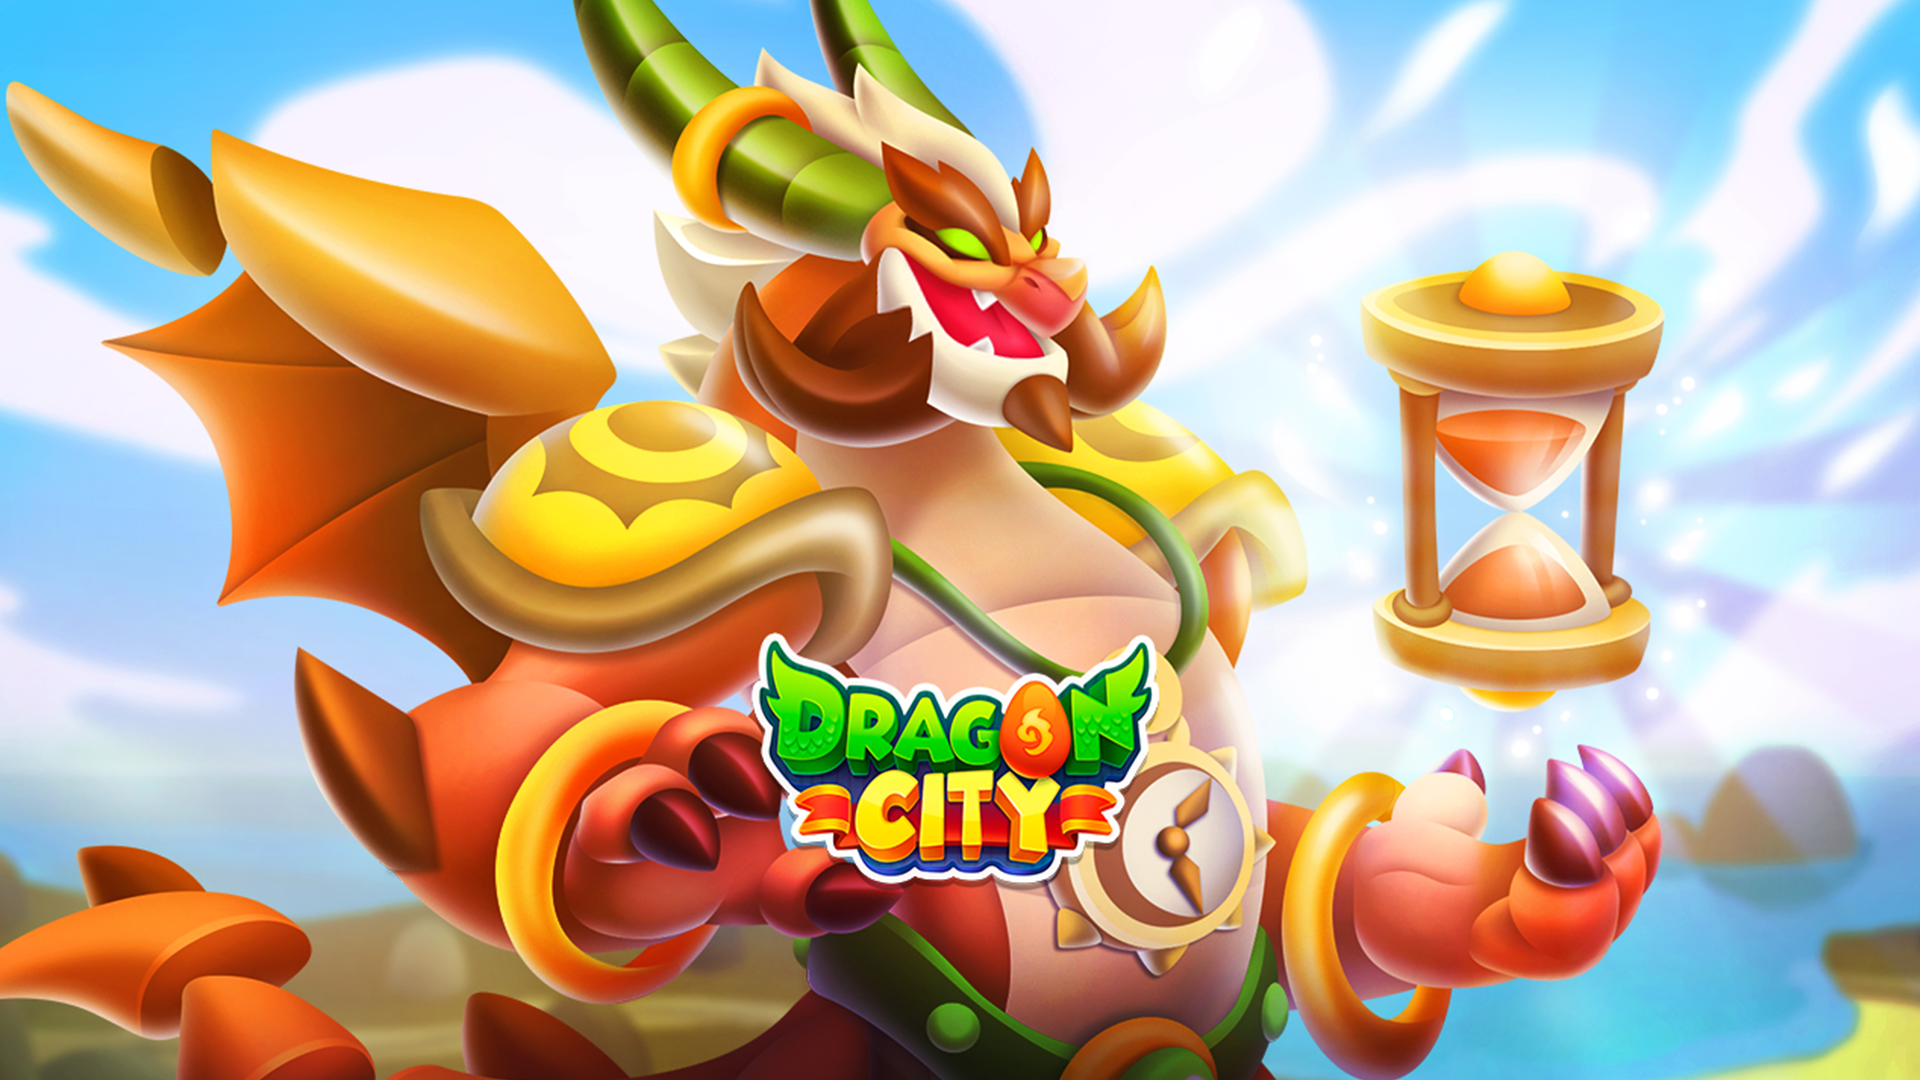 Upcoming events: July 2023  Dragon City Official Store